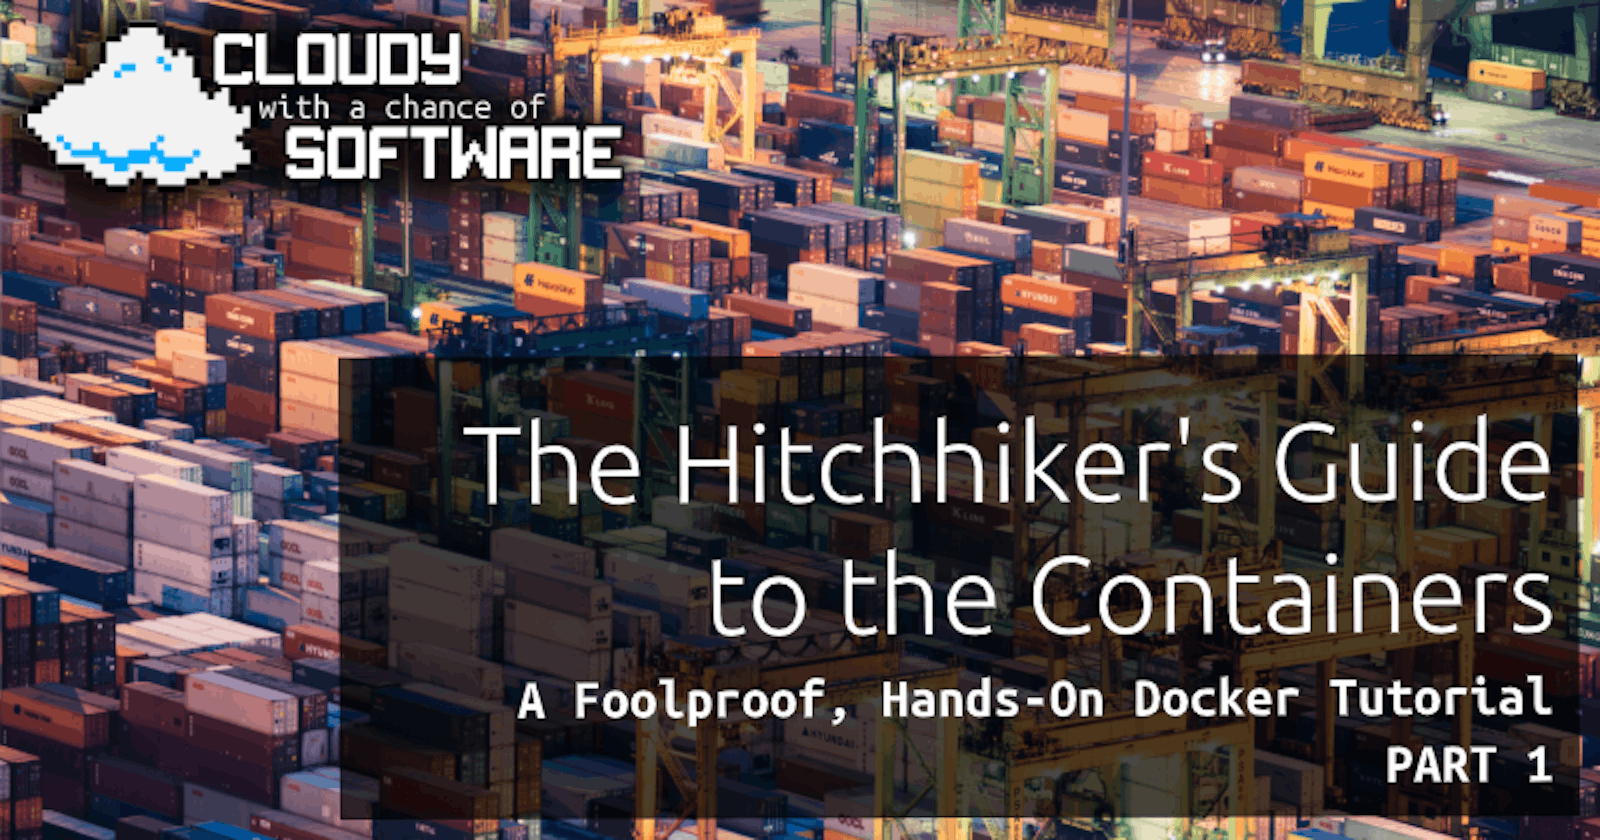 The Hitchhiker's Guide to the Containers: A Foolproof, Hands-on Docker Tutorial